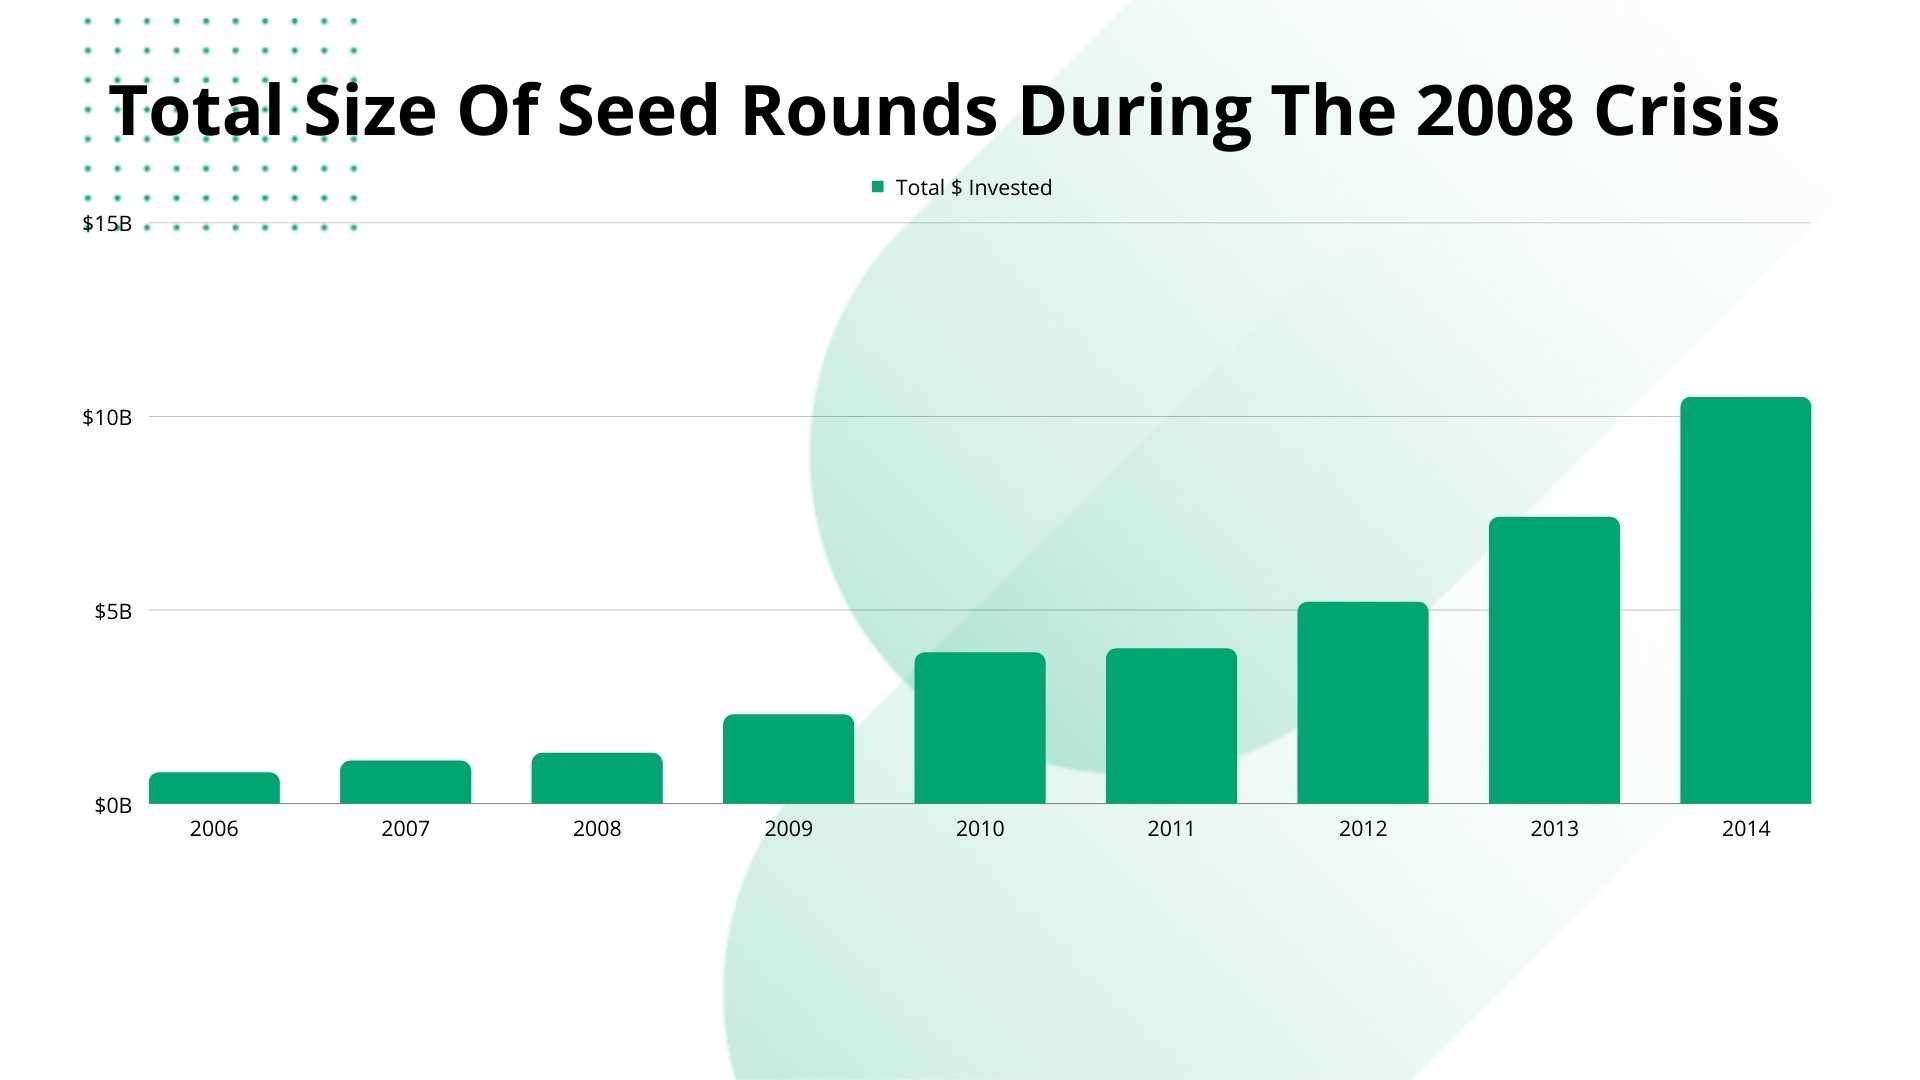 Pre-Seed Investing & Risk. How we think about pre-seed investing